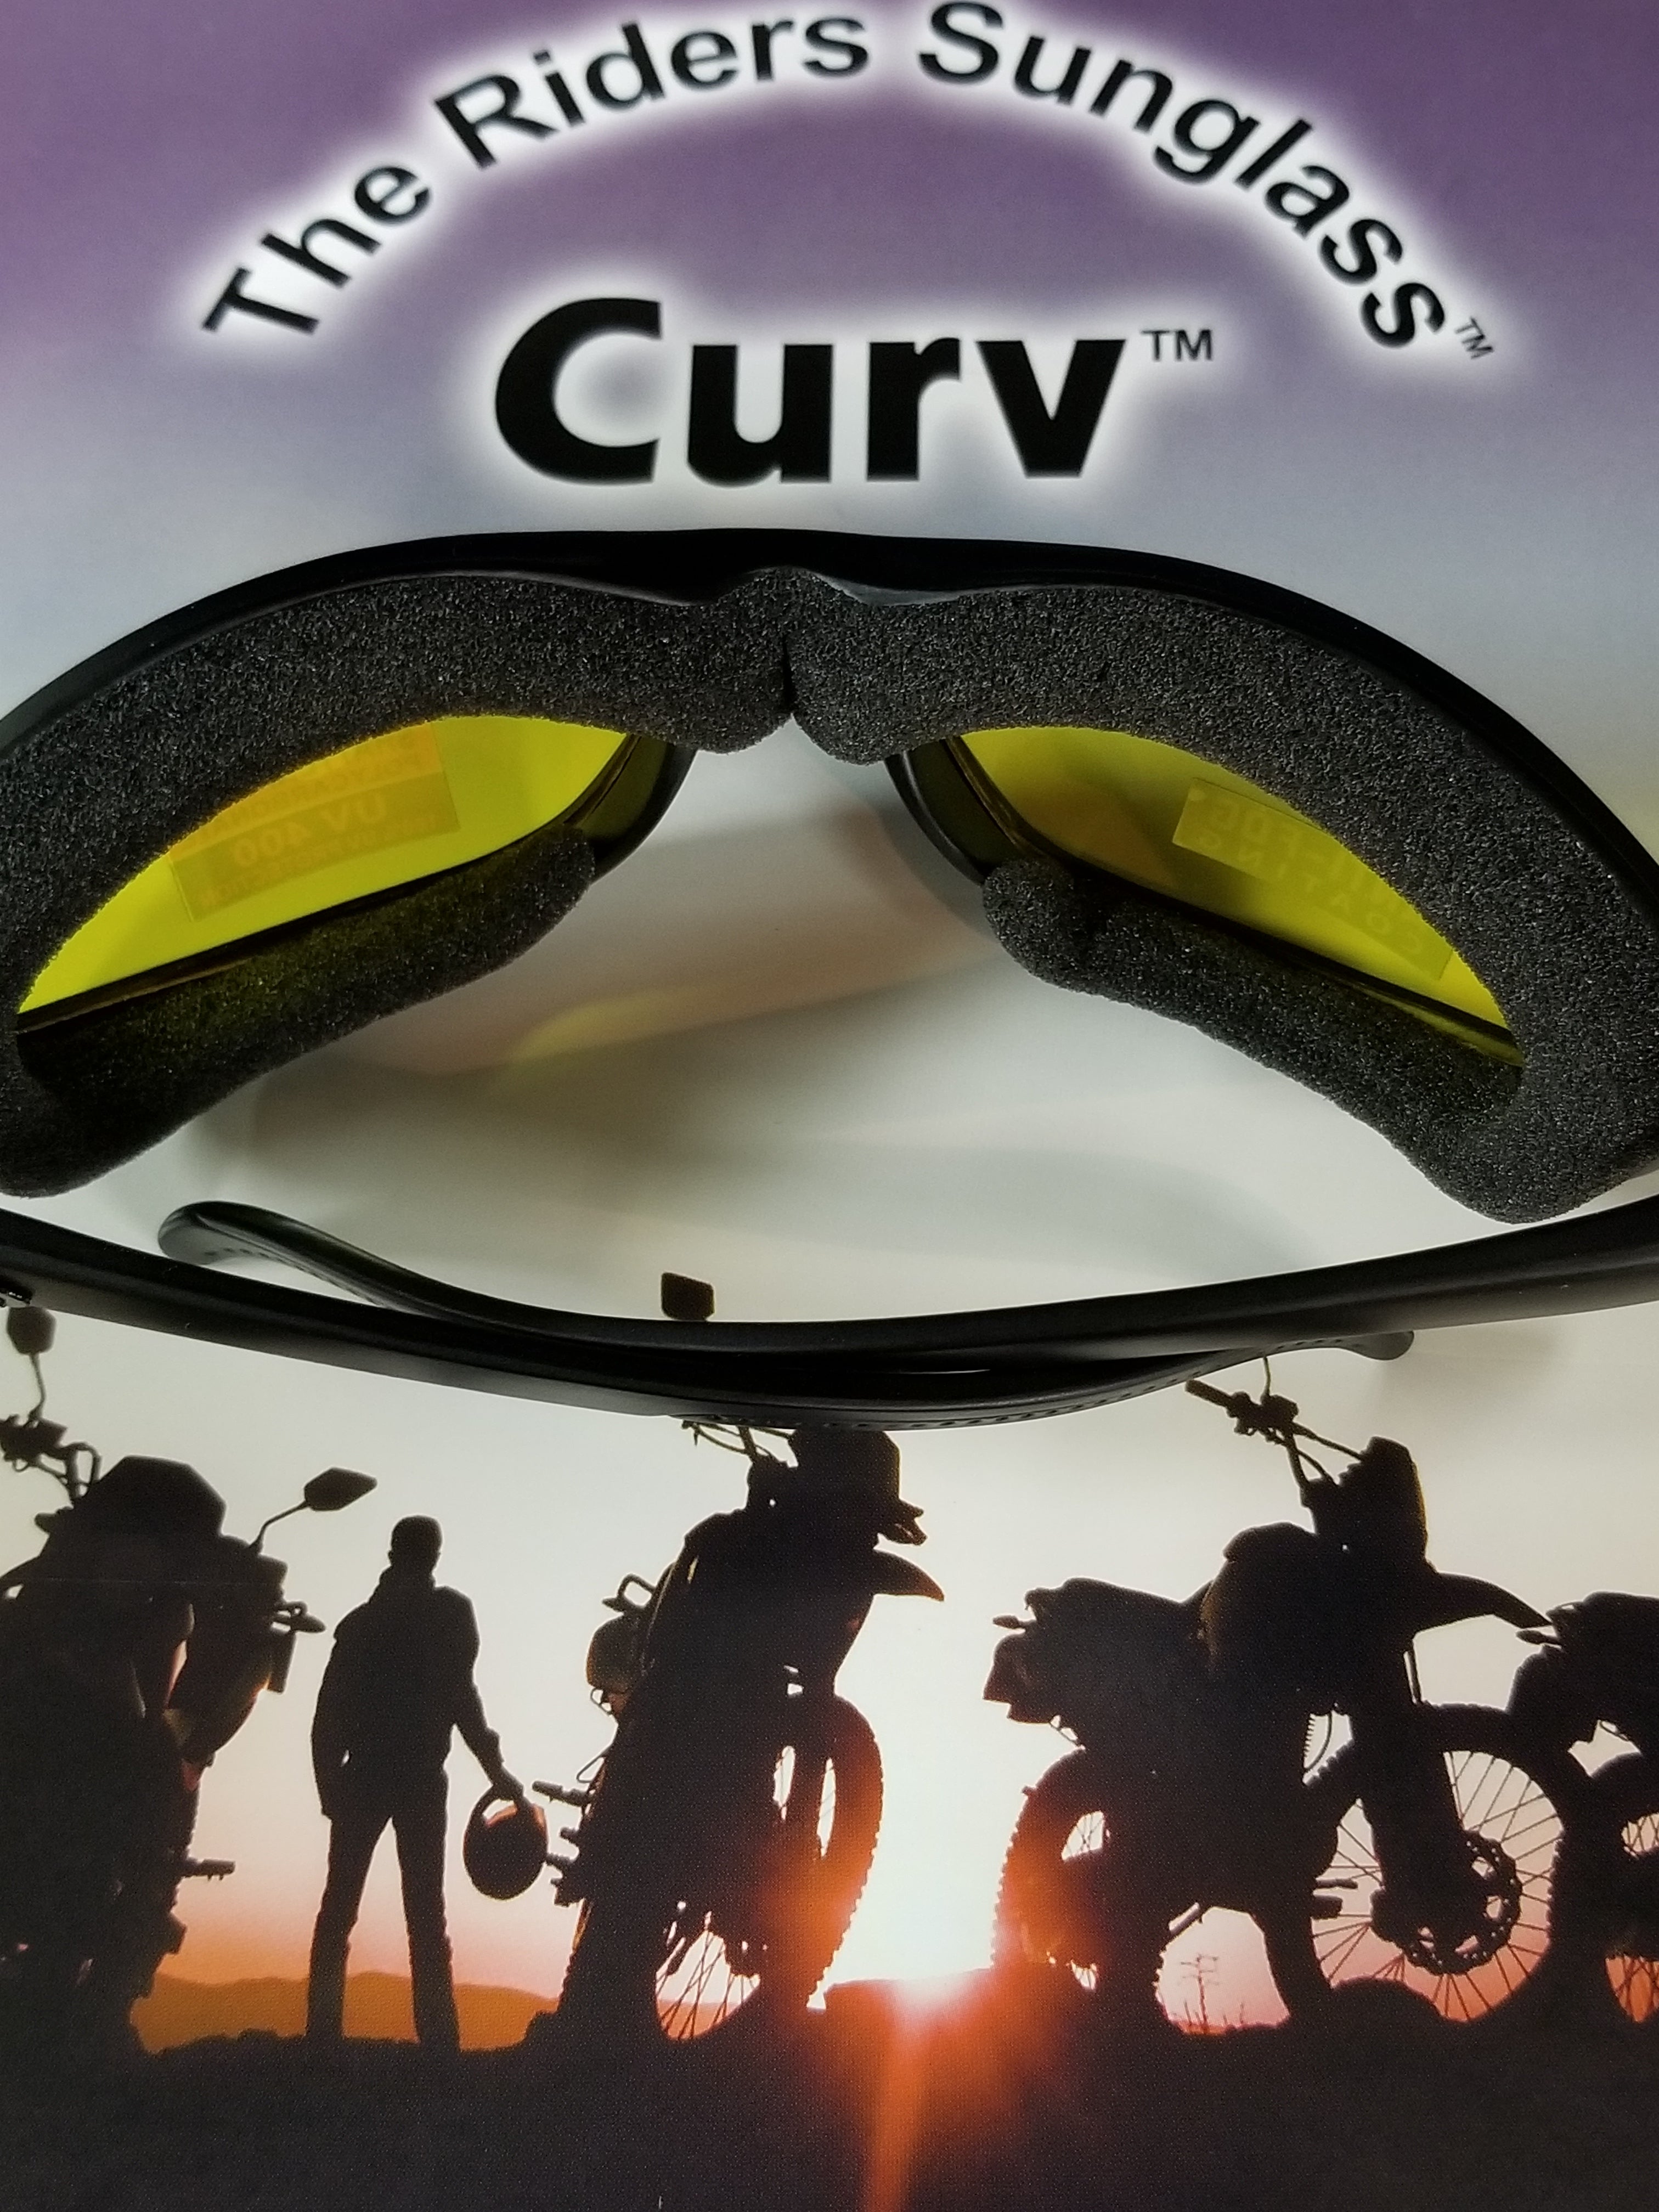 Curv Z Shatterproof Yellow Lens Motorcycle High Definition Riding Sunglass 02-04